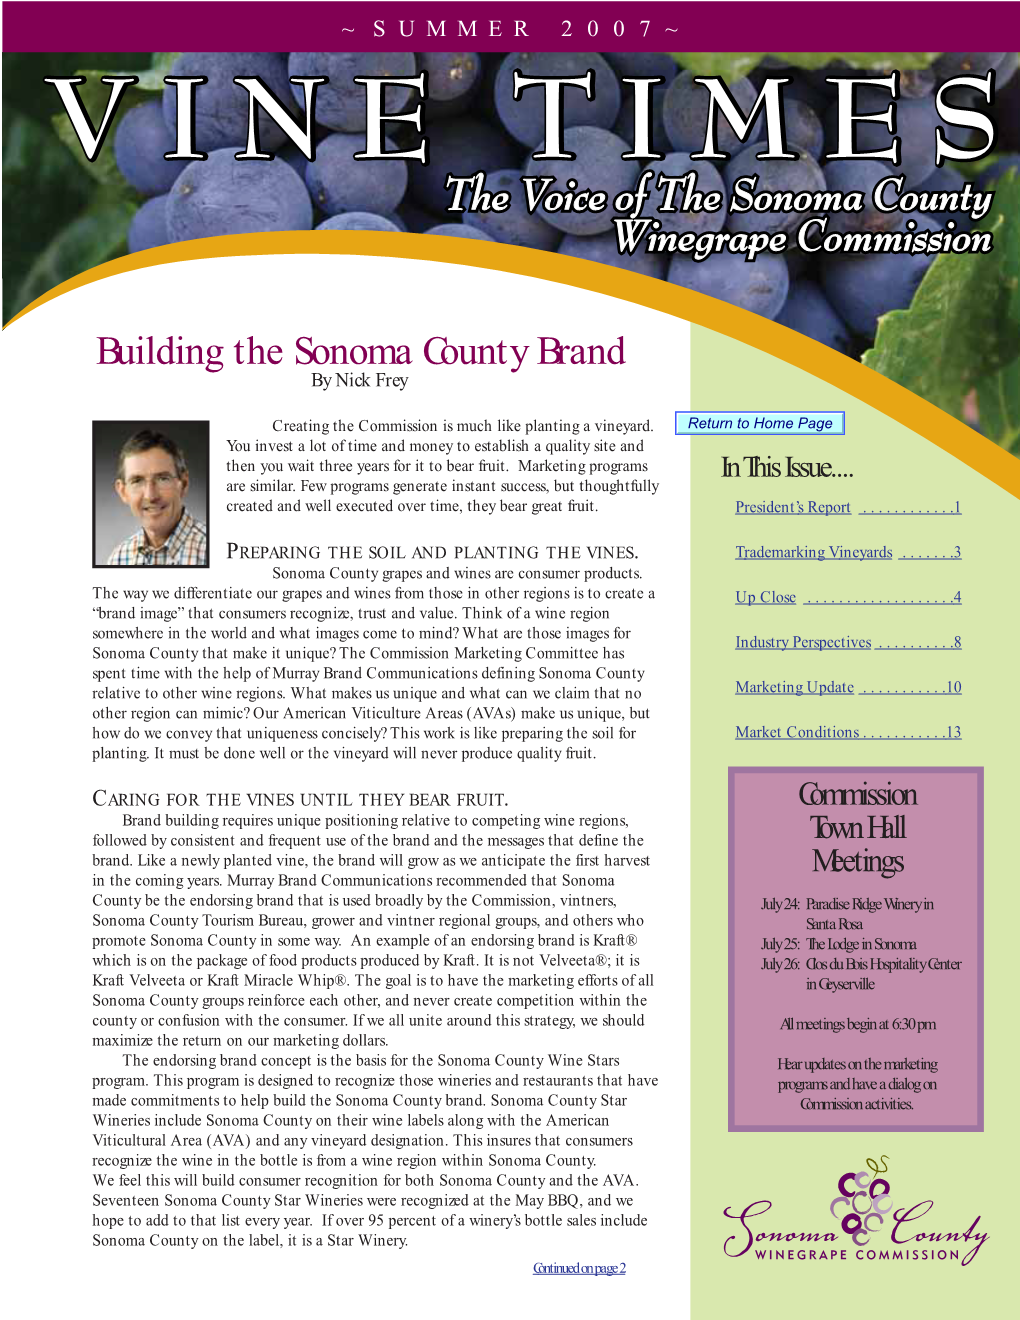 Building the Sonoma County Brand by Nick Frey